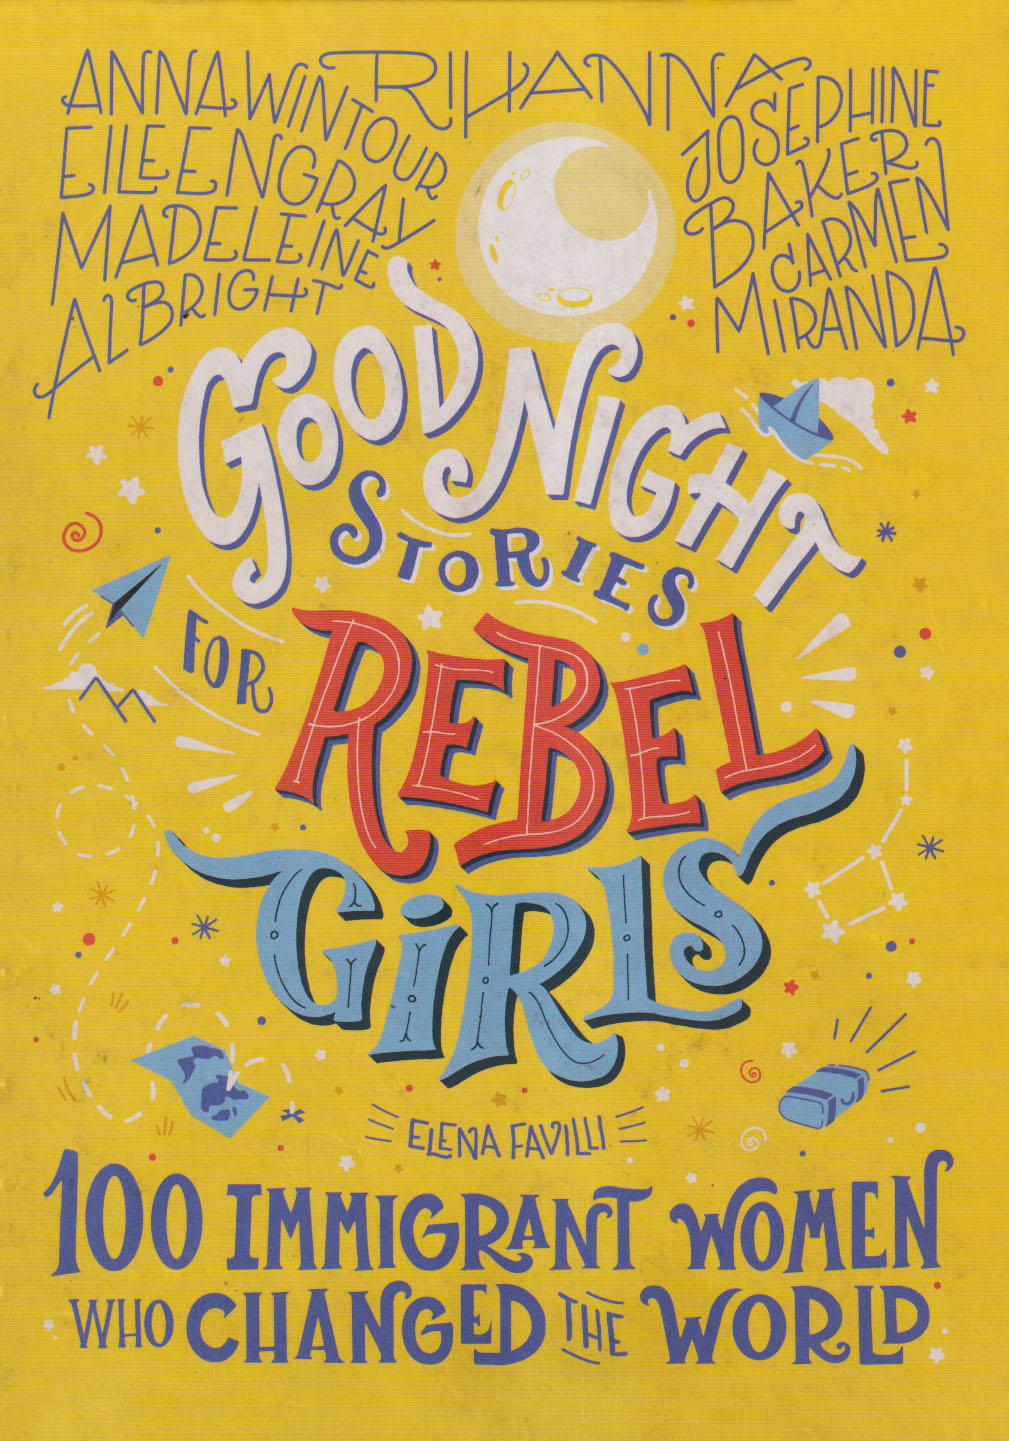 Good Night Stories for Rebel Girls: 100 Immigrant Women Who Changed the World (Volume 3) (হার্ডকভার)